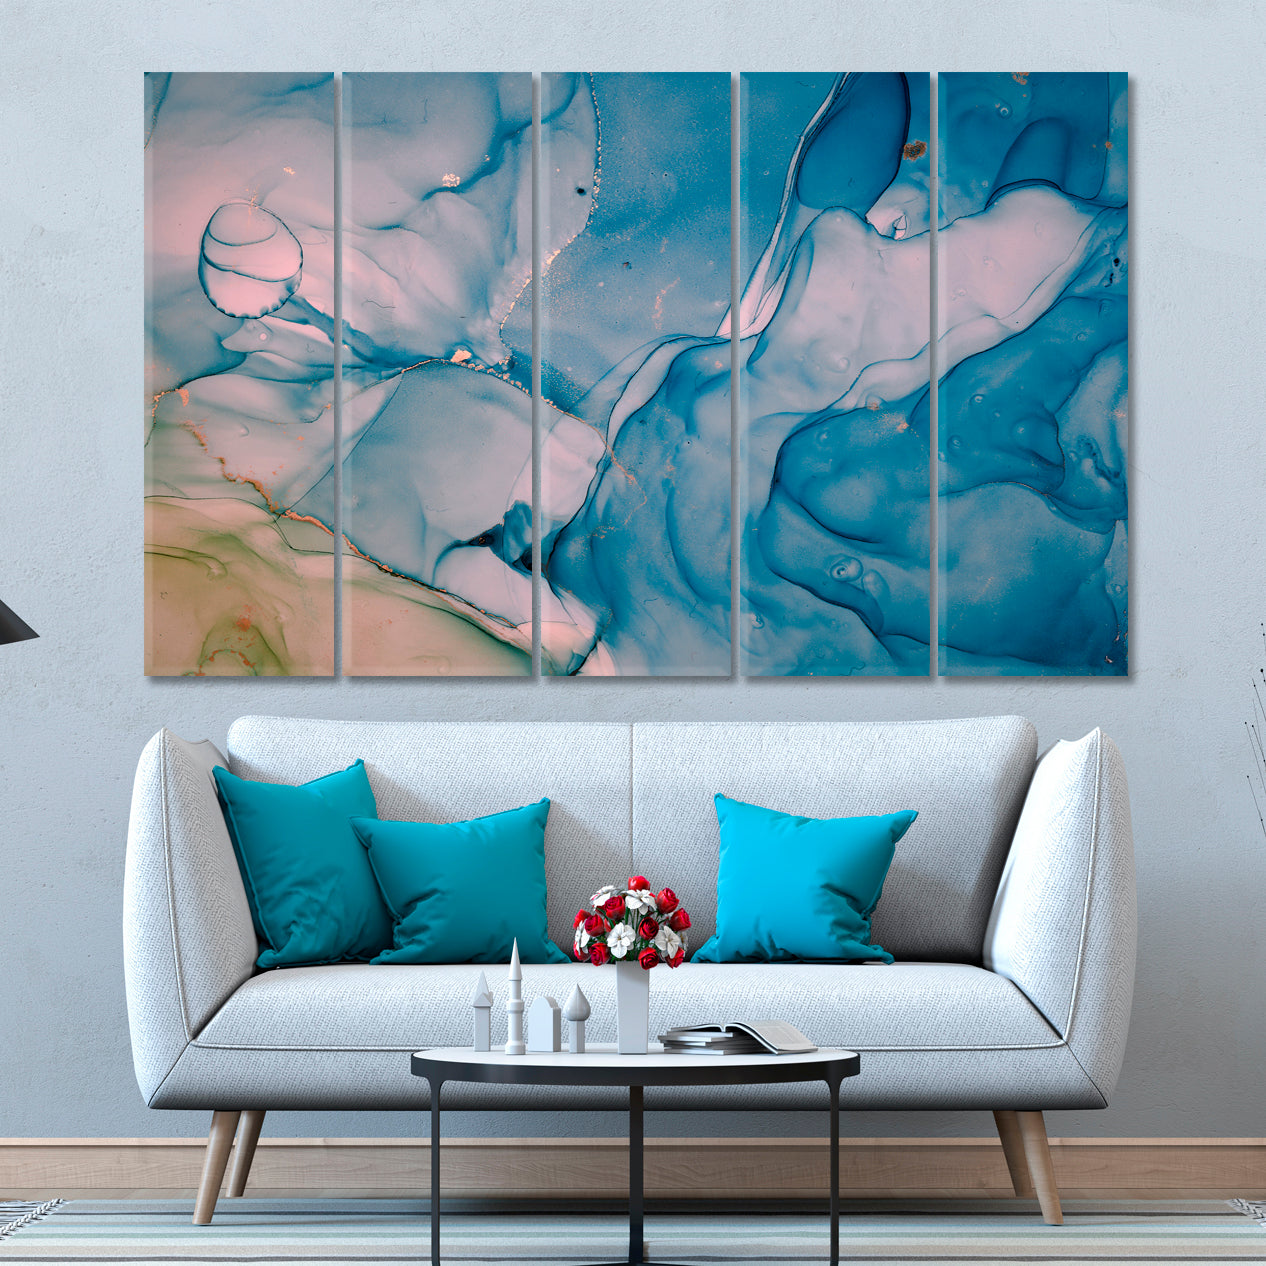 ABSTRACT SKY LANDSCAPE Alcohol Ink Colors Translucent Marble Fluid Art, Oriental Marbling Canvas Print Artesty 5 panels 36" x 24" 